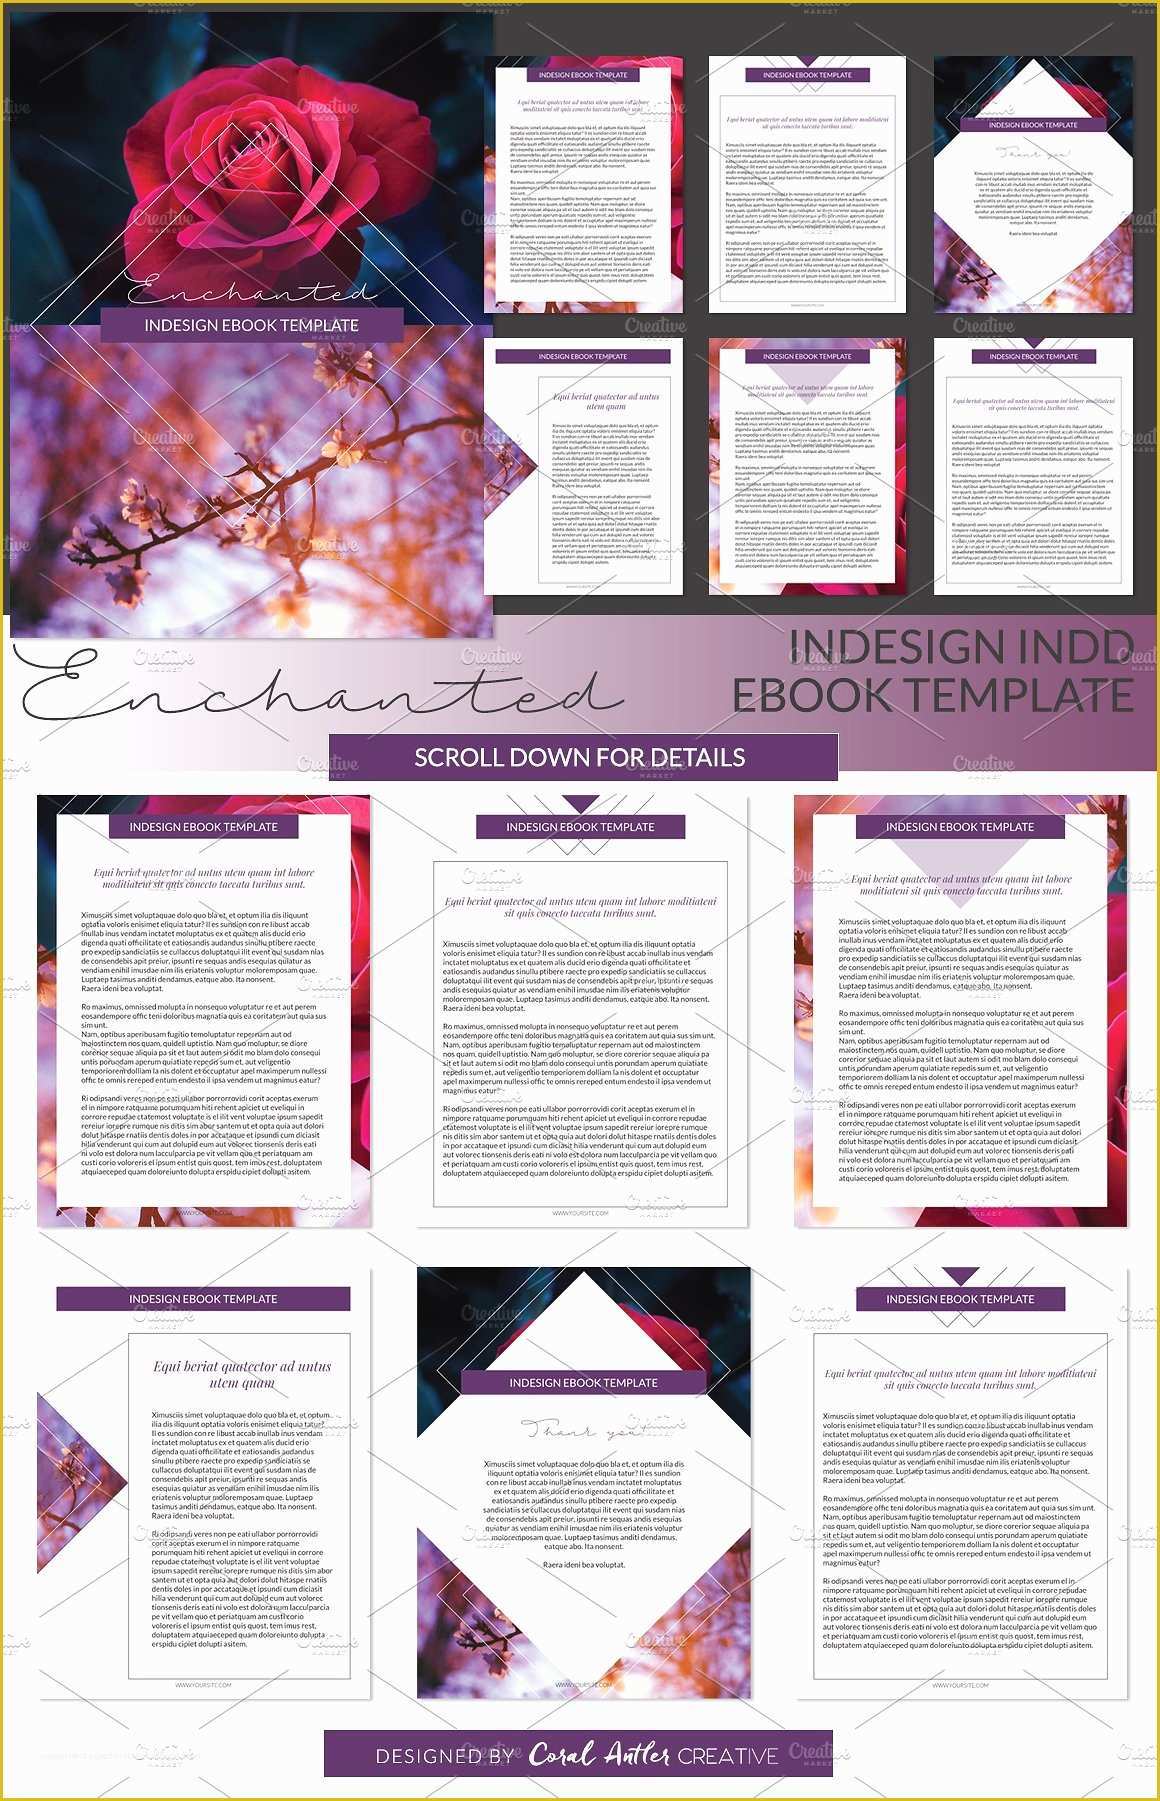 Free Ebook Template Indesign Of Enchanted Indesign Ebook Template Presentation Templates